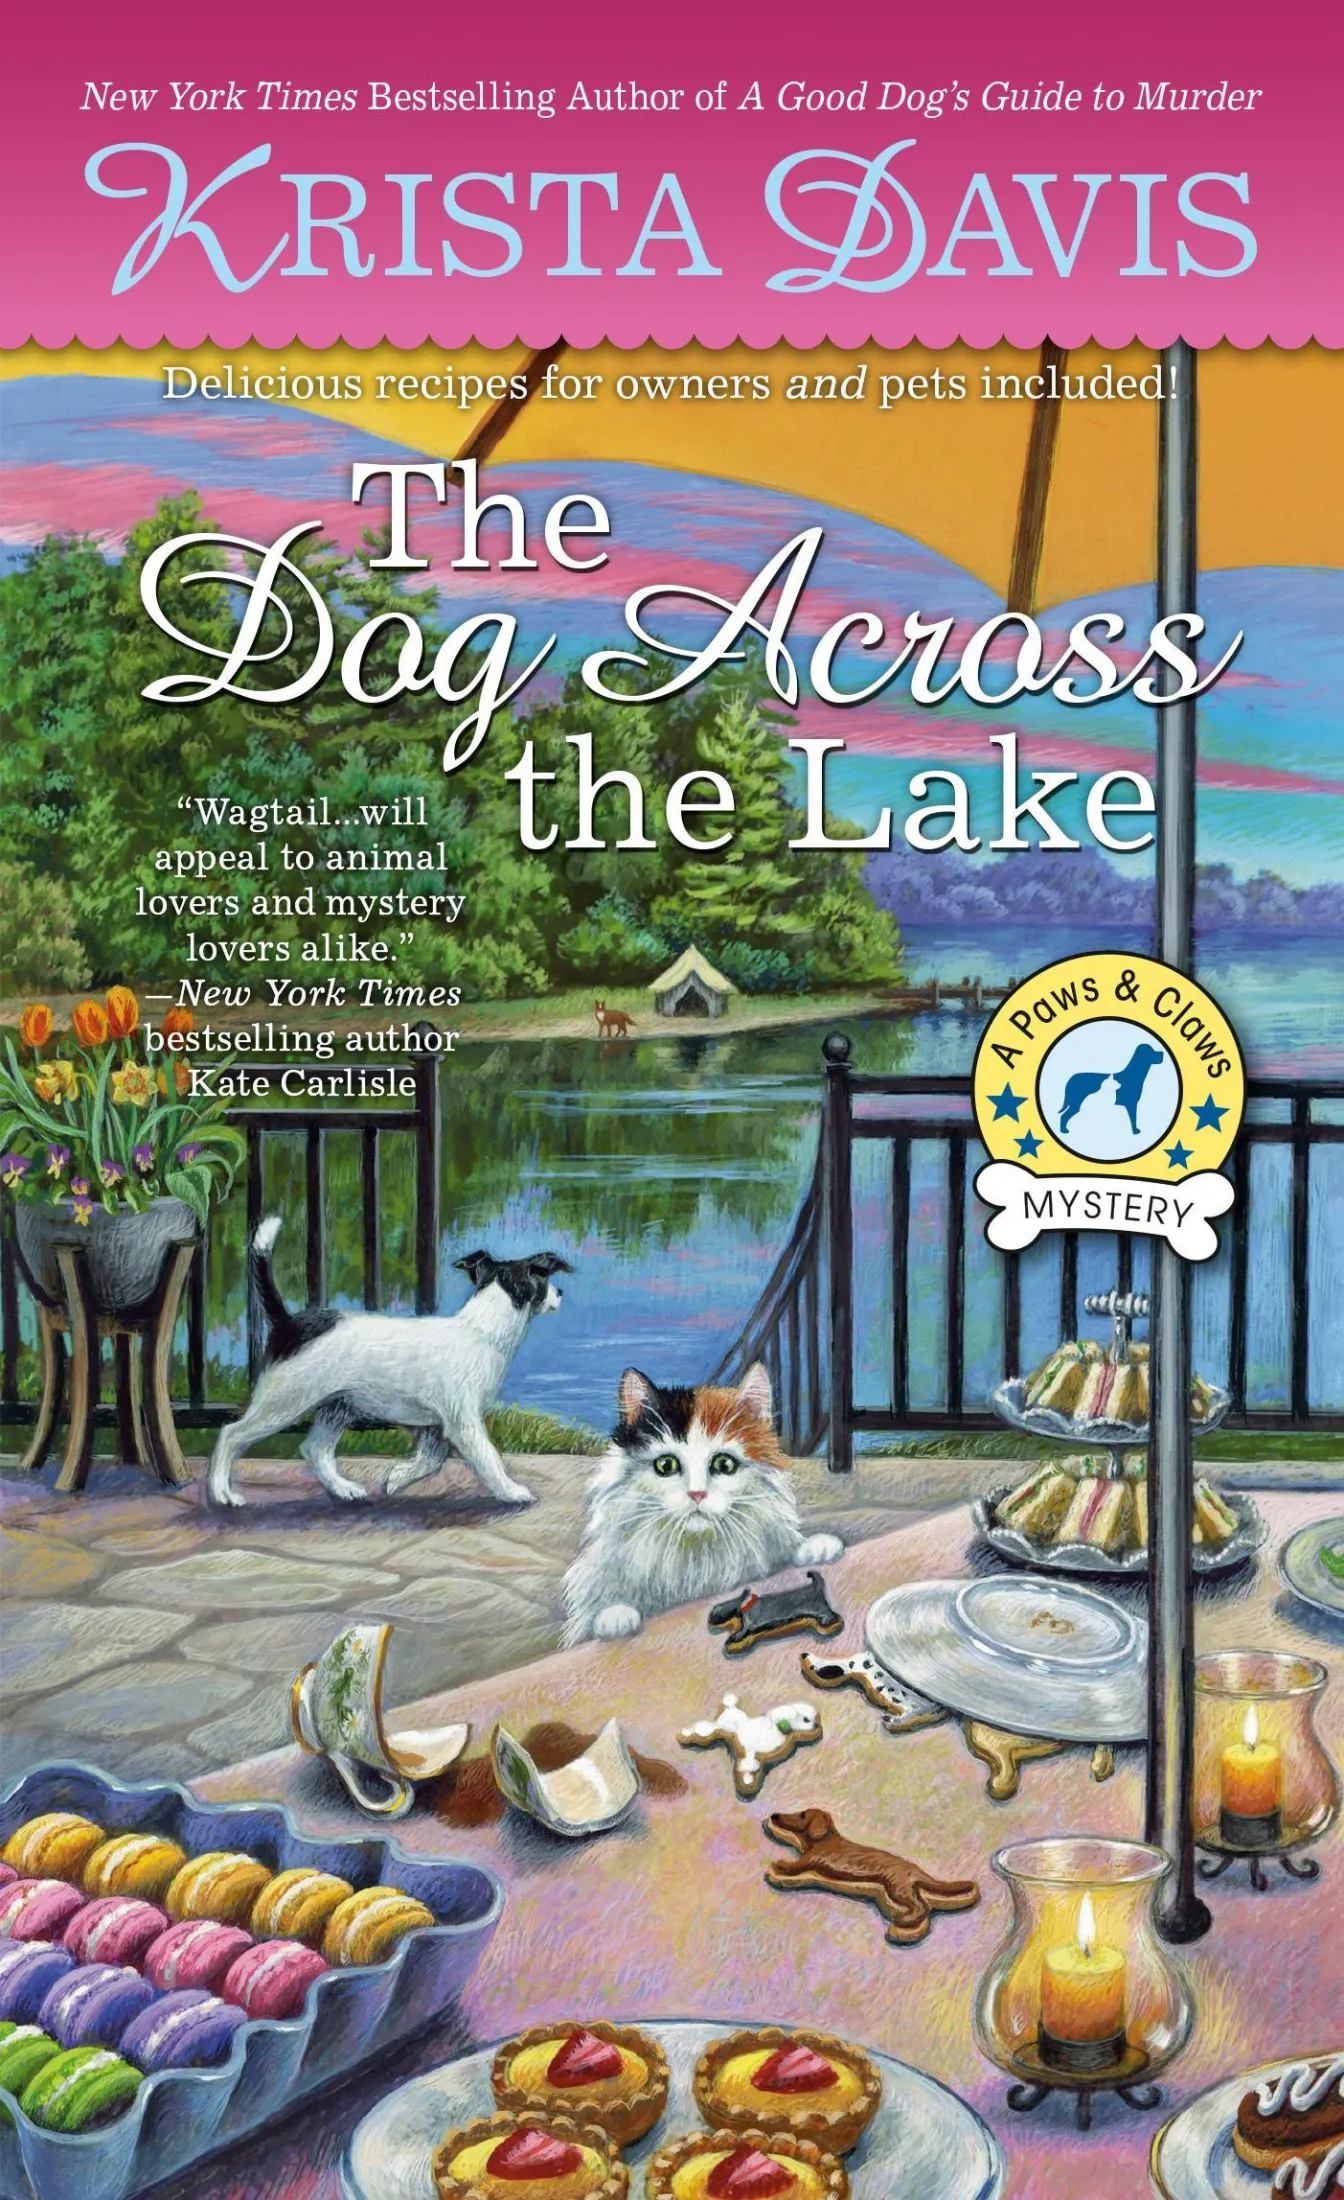 The Dog Across the Lake (A Paws & Claws Mystery #9)